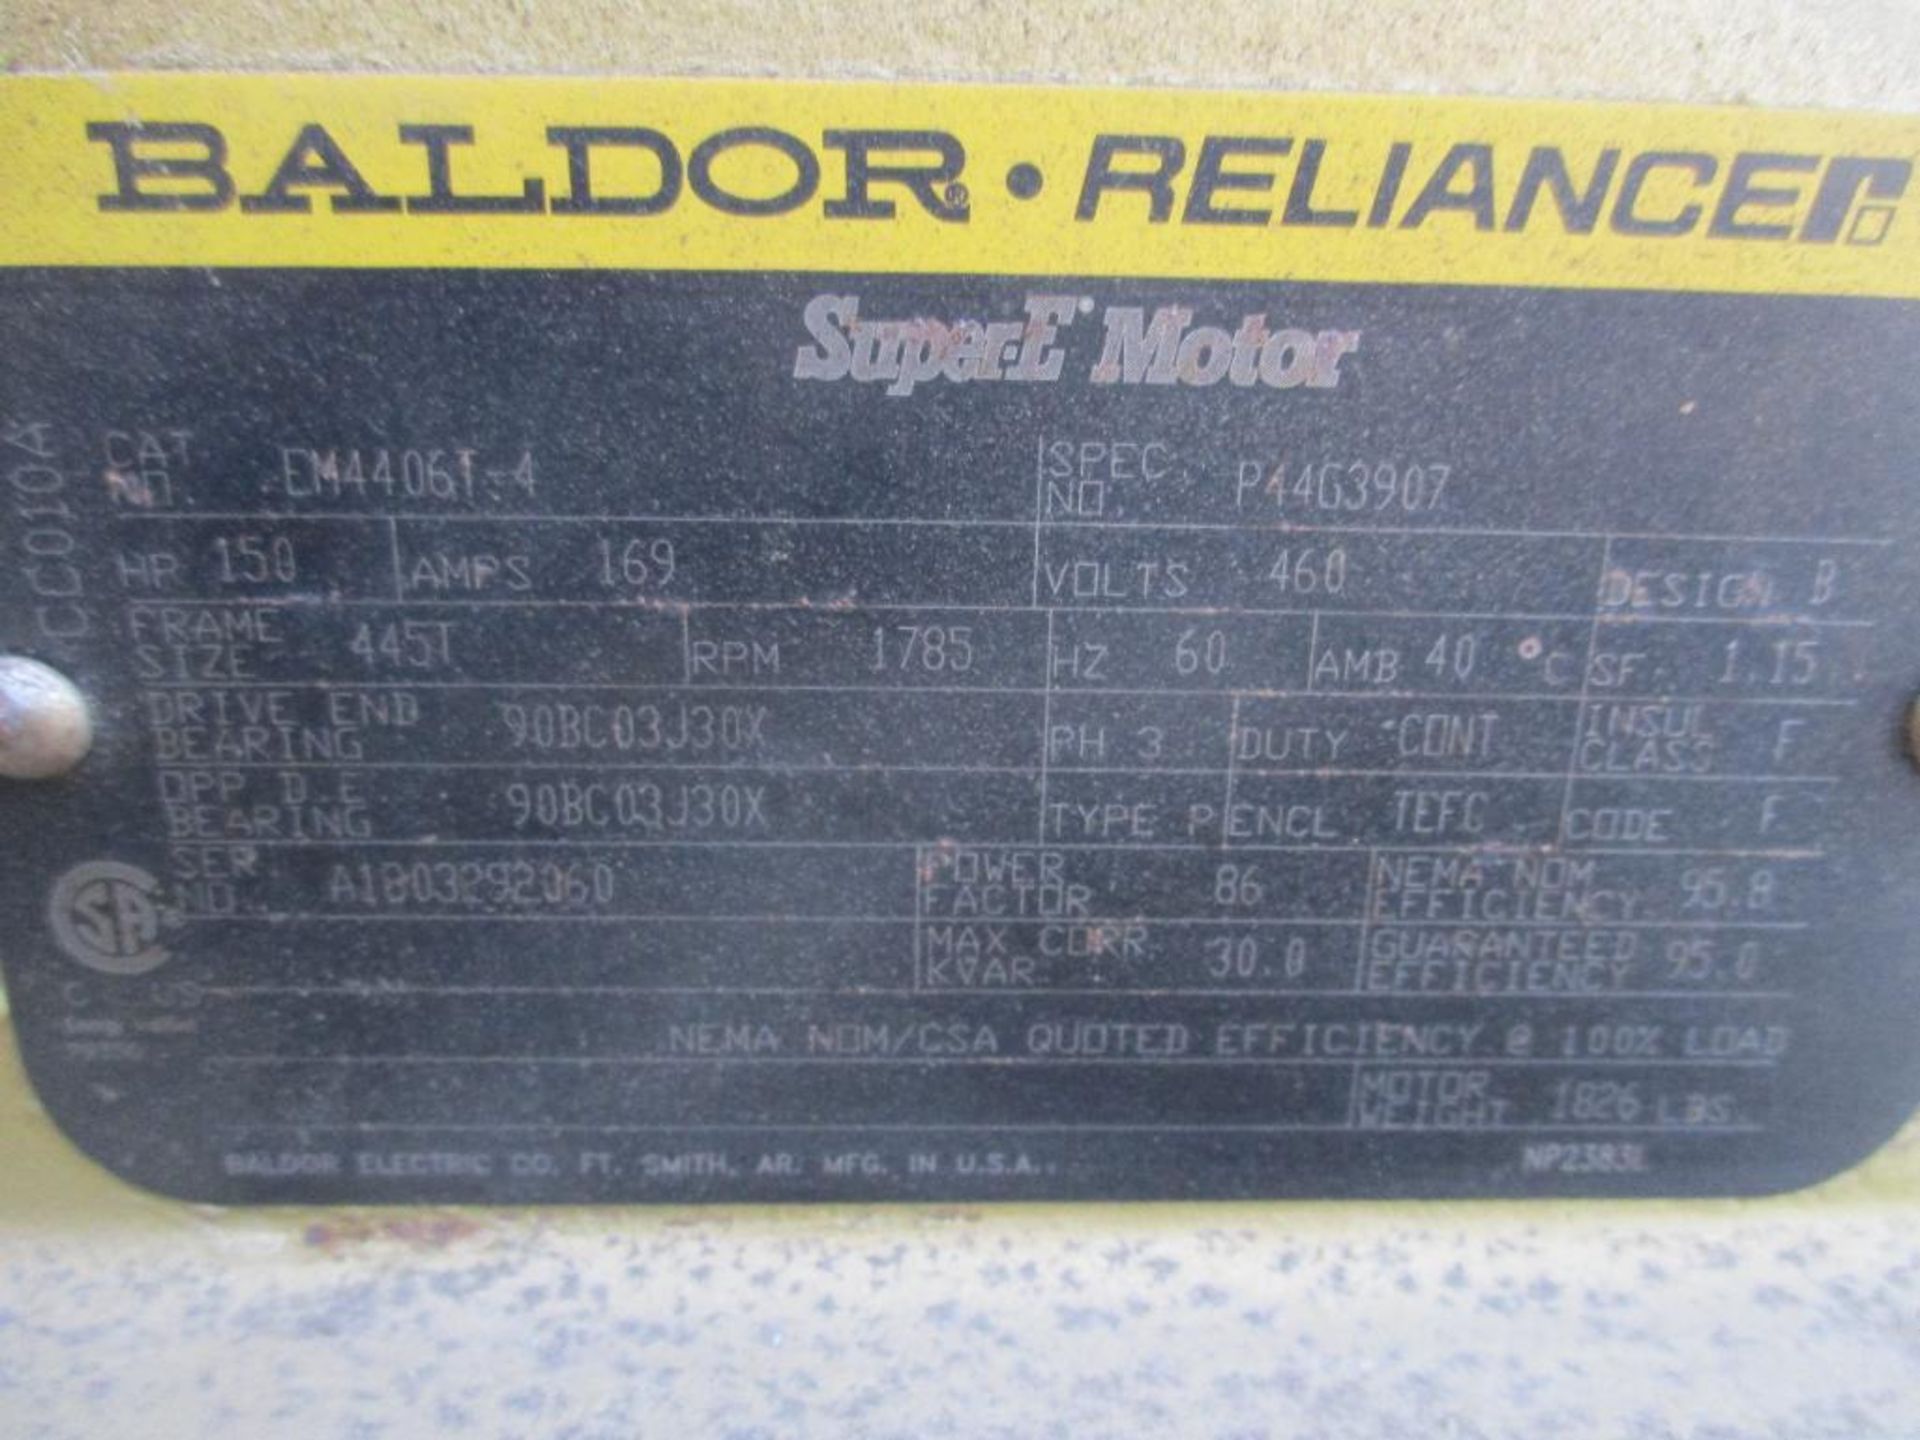 BALDOR 3 PHASE 150HP 1785RPM 445T FRAME A/C MOTOR P/N EM4406T-4 2006# LBS (THIS LOT IS FOB KNOXVILLE - Image 2 of 5